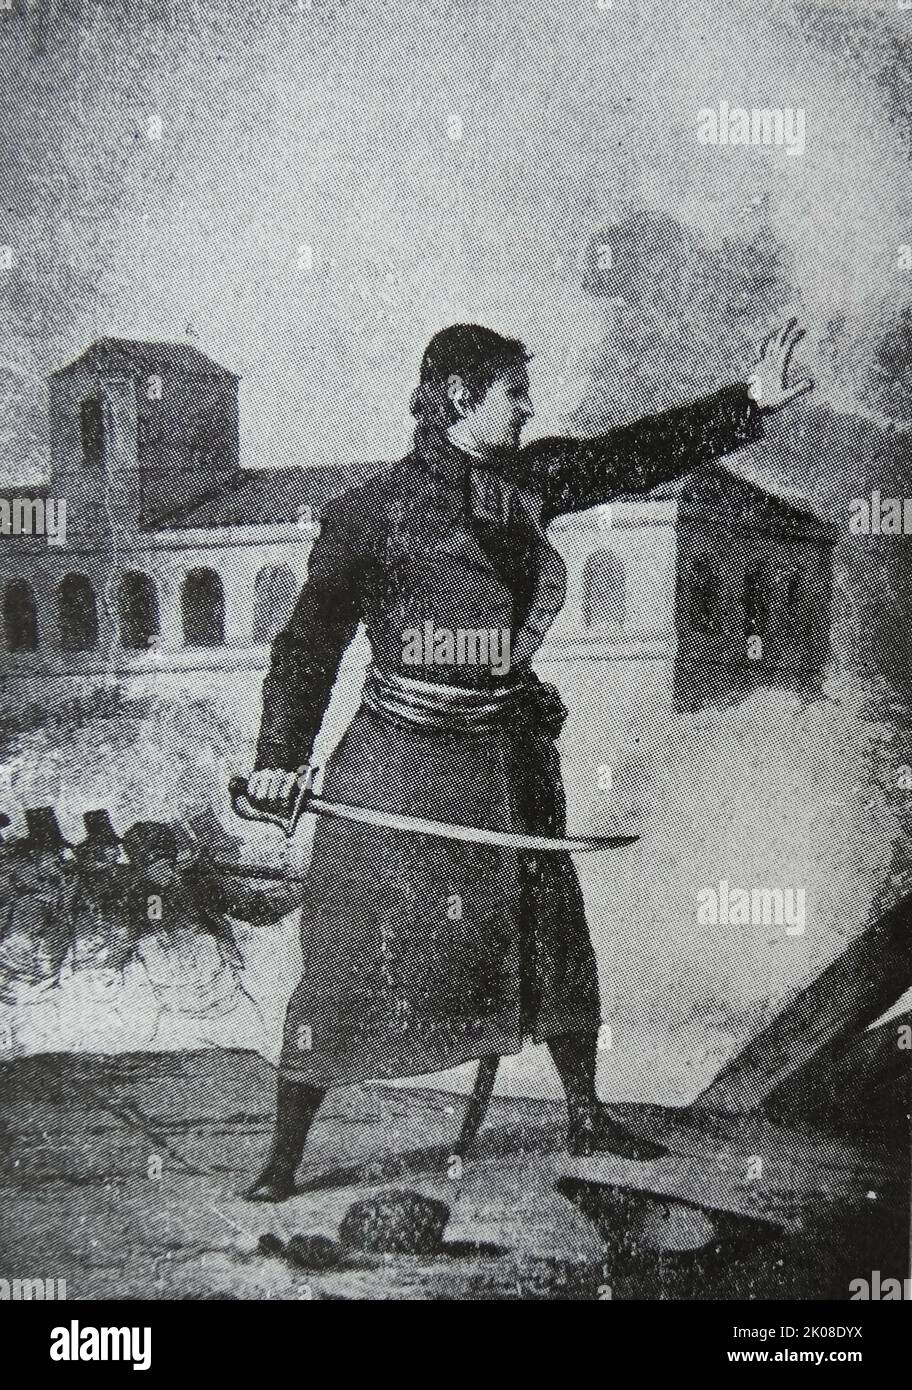 Santiago Sas y Casayau, born in Zaragoza, in 1774 and died in Zaragoza in 1809. Aragonese clergyman who distinguished himself in the defense of Zaragoza during the Sieges in the war of Spanish independence Stock Photo